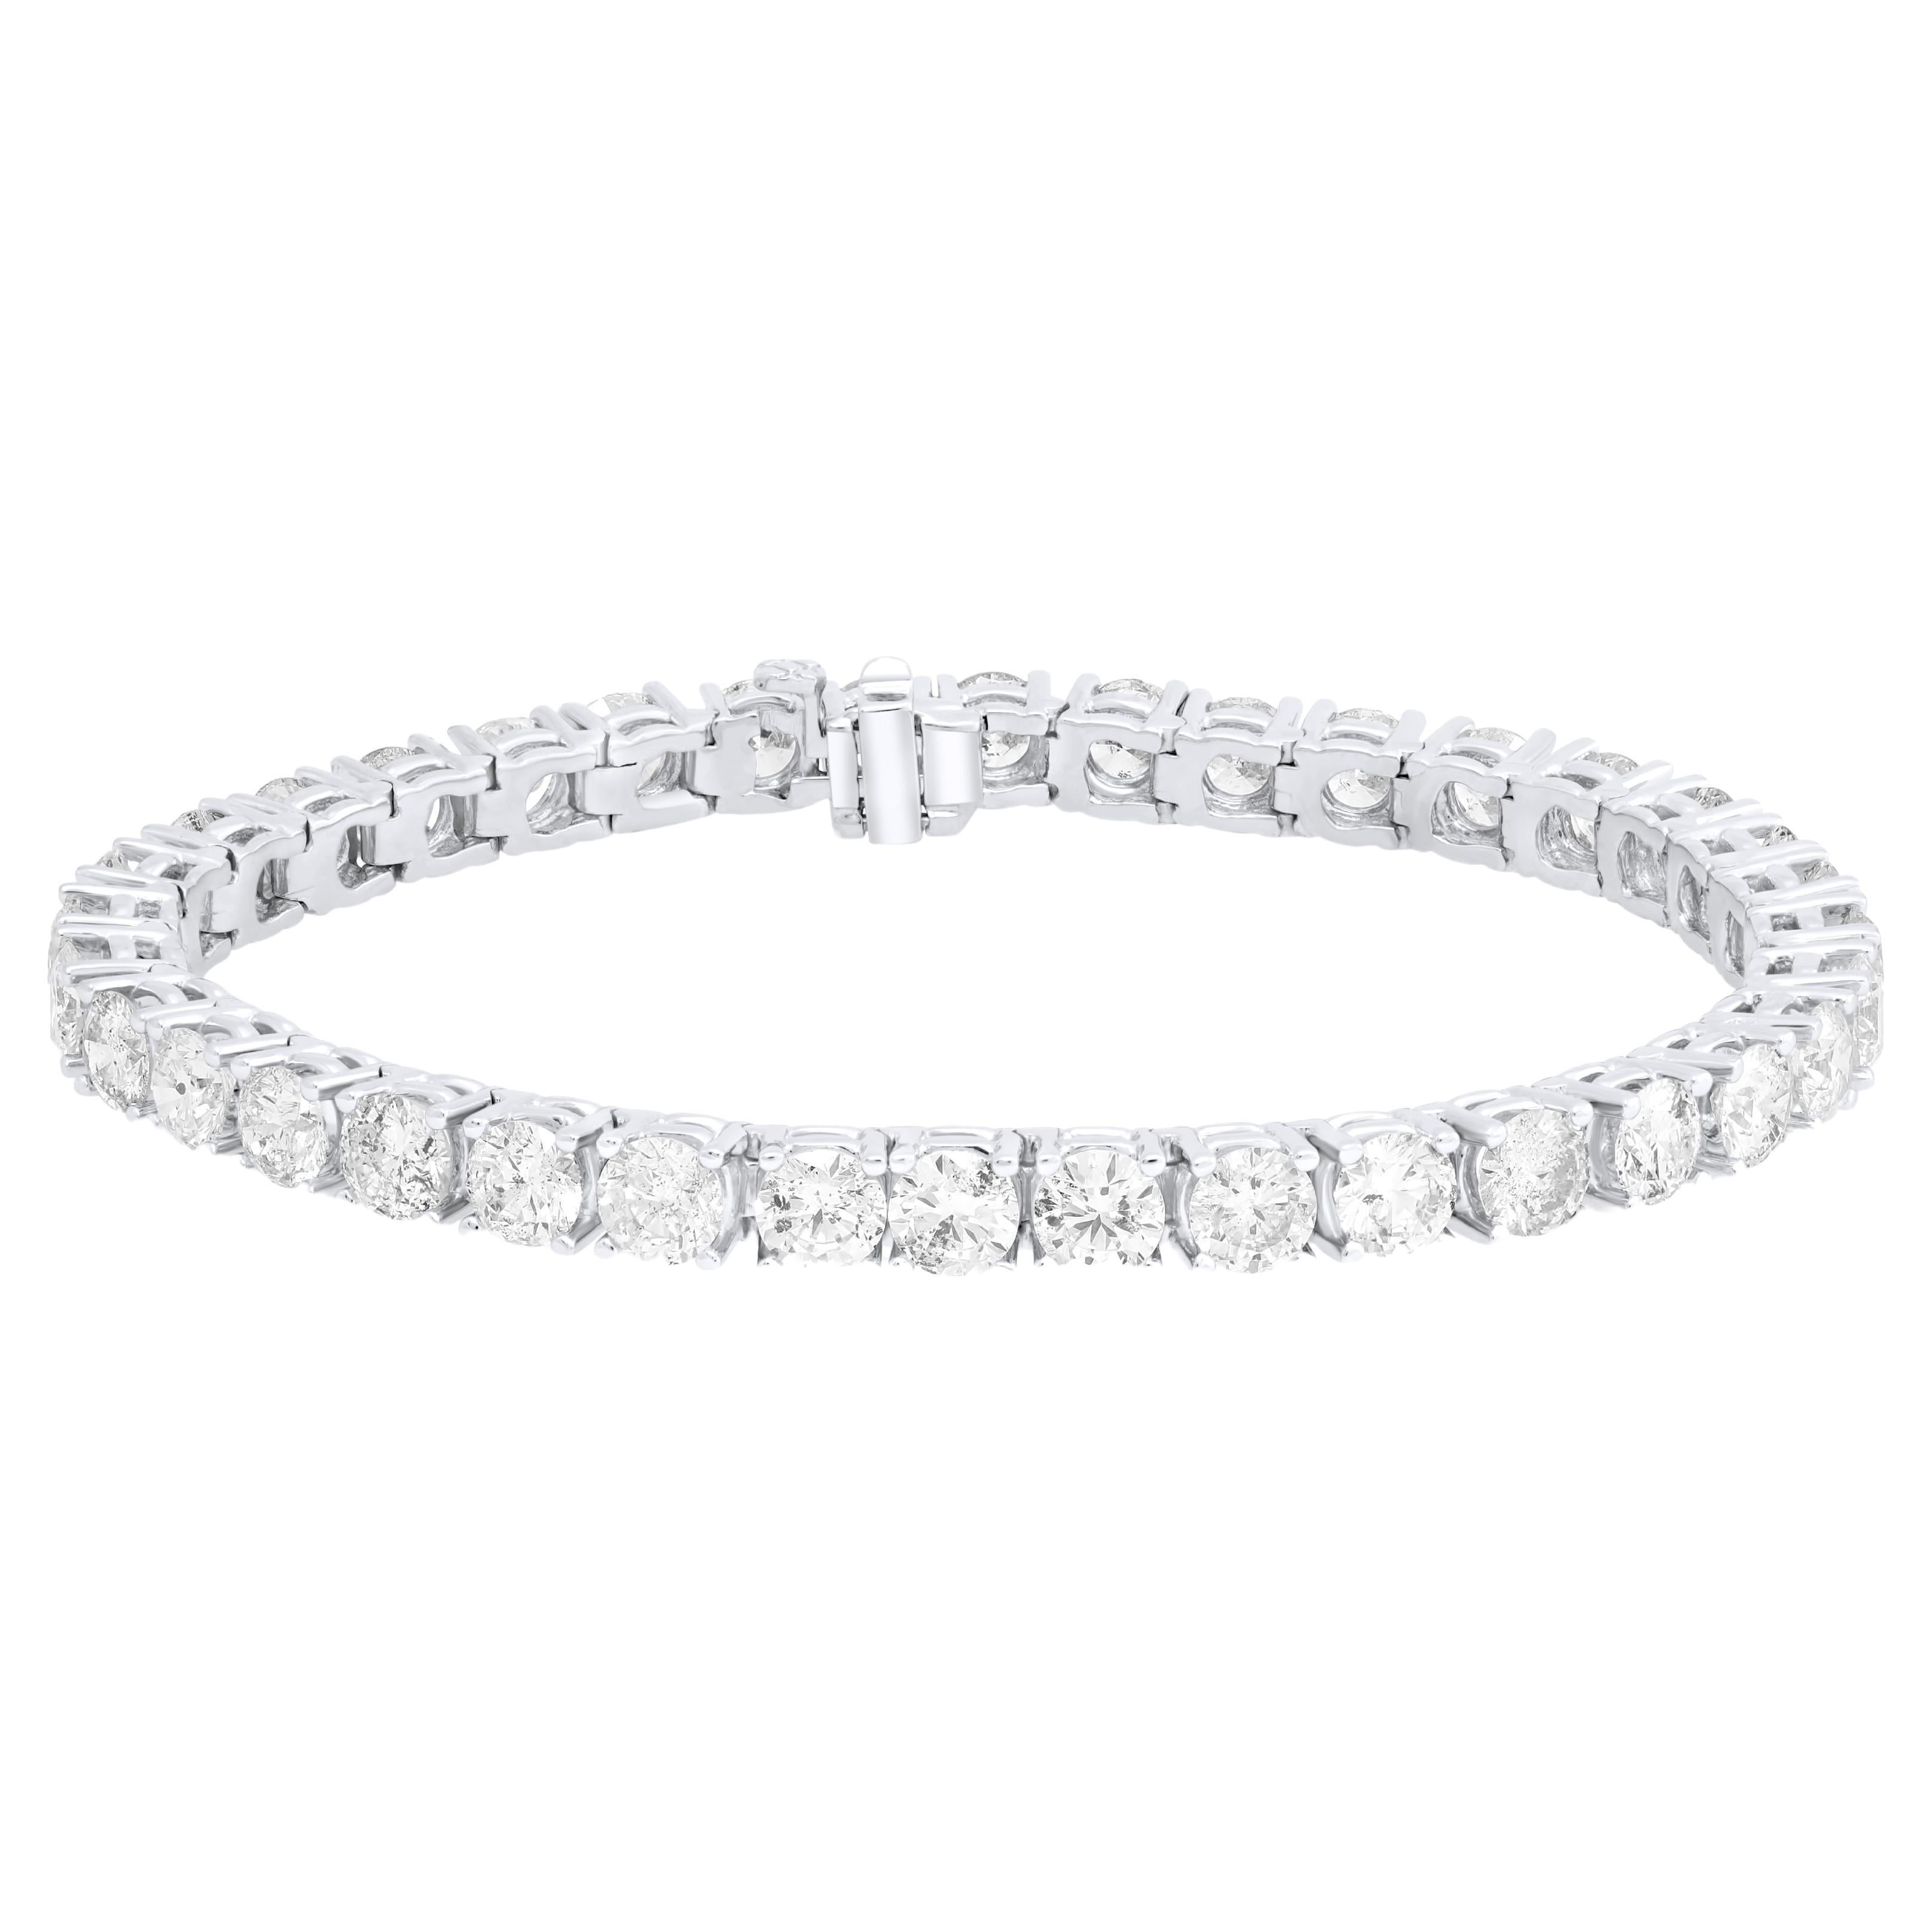 Diana M.18 kt white gold 4 prong diamond tennis bracelet adorned with 12.01 cts  For Sale